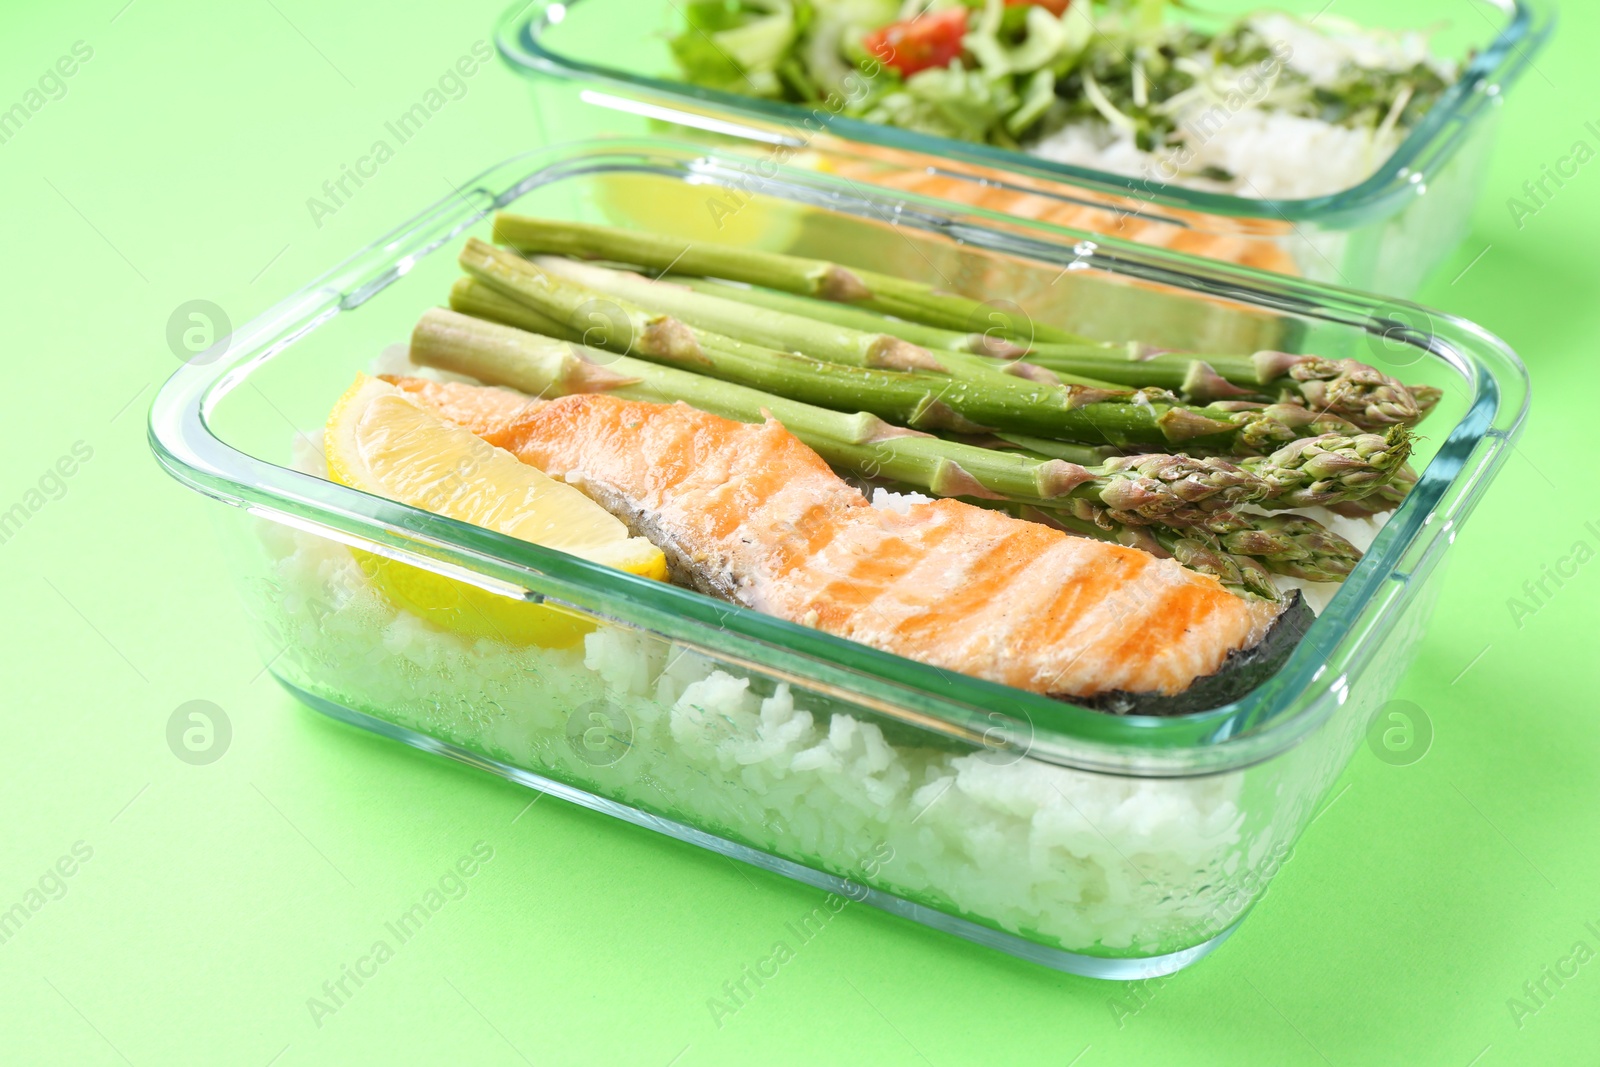 Photo of Healthy meal. Different products in glass containers on green background, closeup